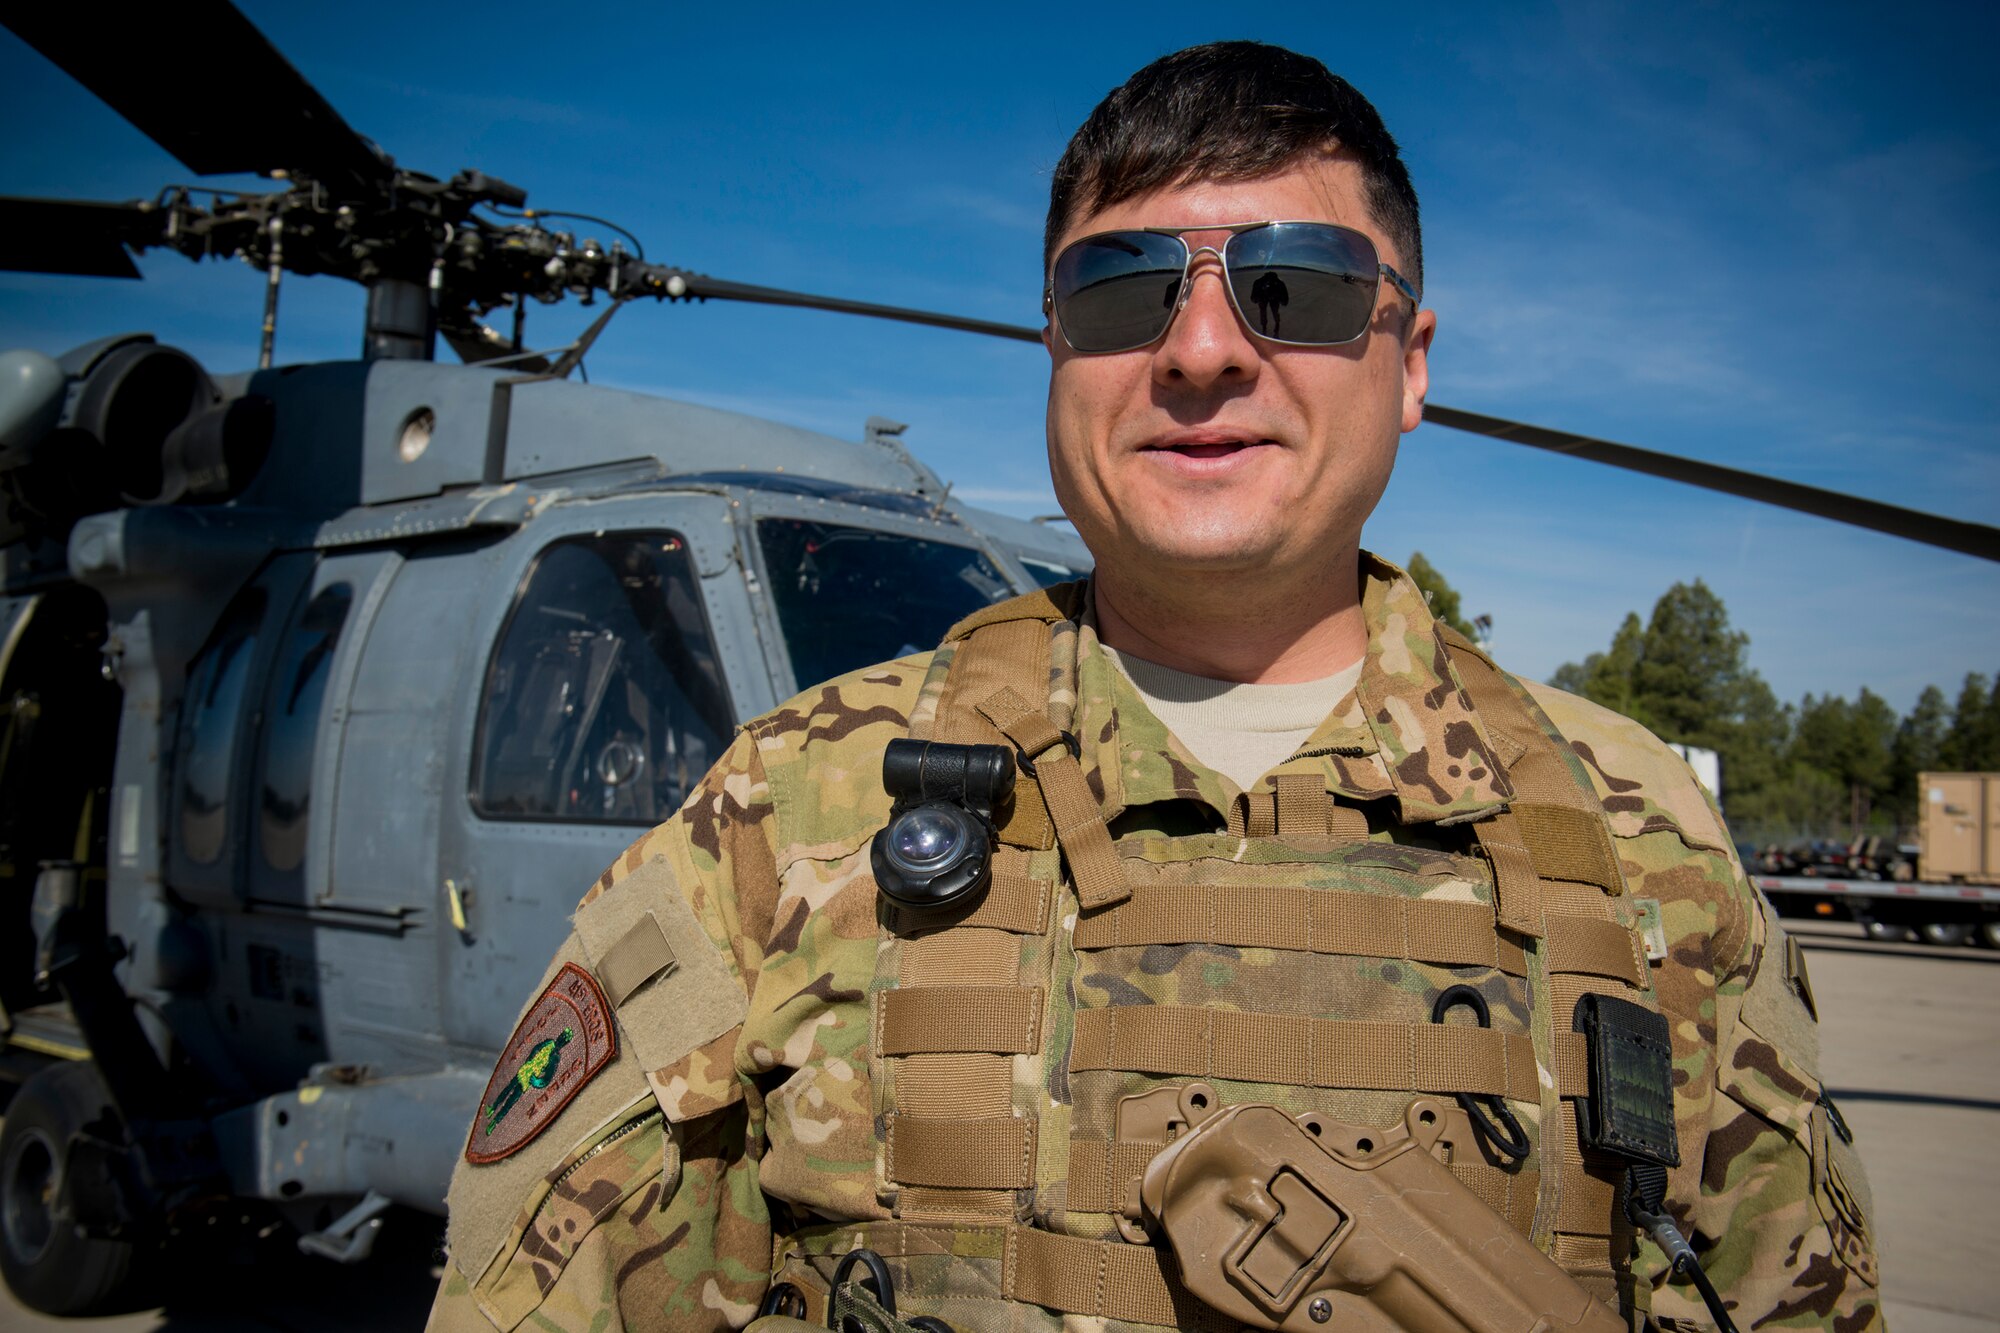 U.S. Air Force Tech. Sgt. Vincent Hnat, 41st Rescue Squadron special missions aviator out of Moody Air Force Base, Ga., poses for a photo May 17, 2014, at Pulliam Airport, Ariz. Hnat began his journey as a special missions aviator in 2009 after cross training from the precision measurement equipment laboratory career field. (U.S. Air Force photo by Staff Sgt. Jamal D. Sutter/Released) 